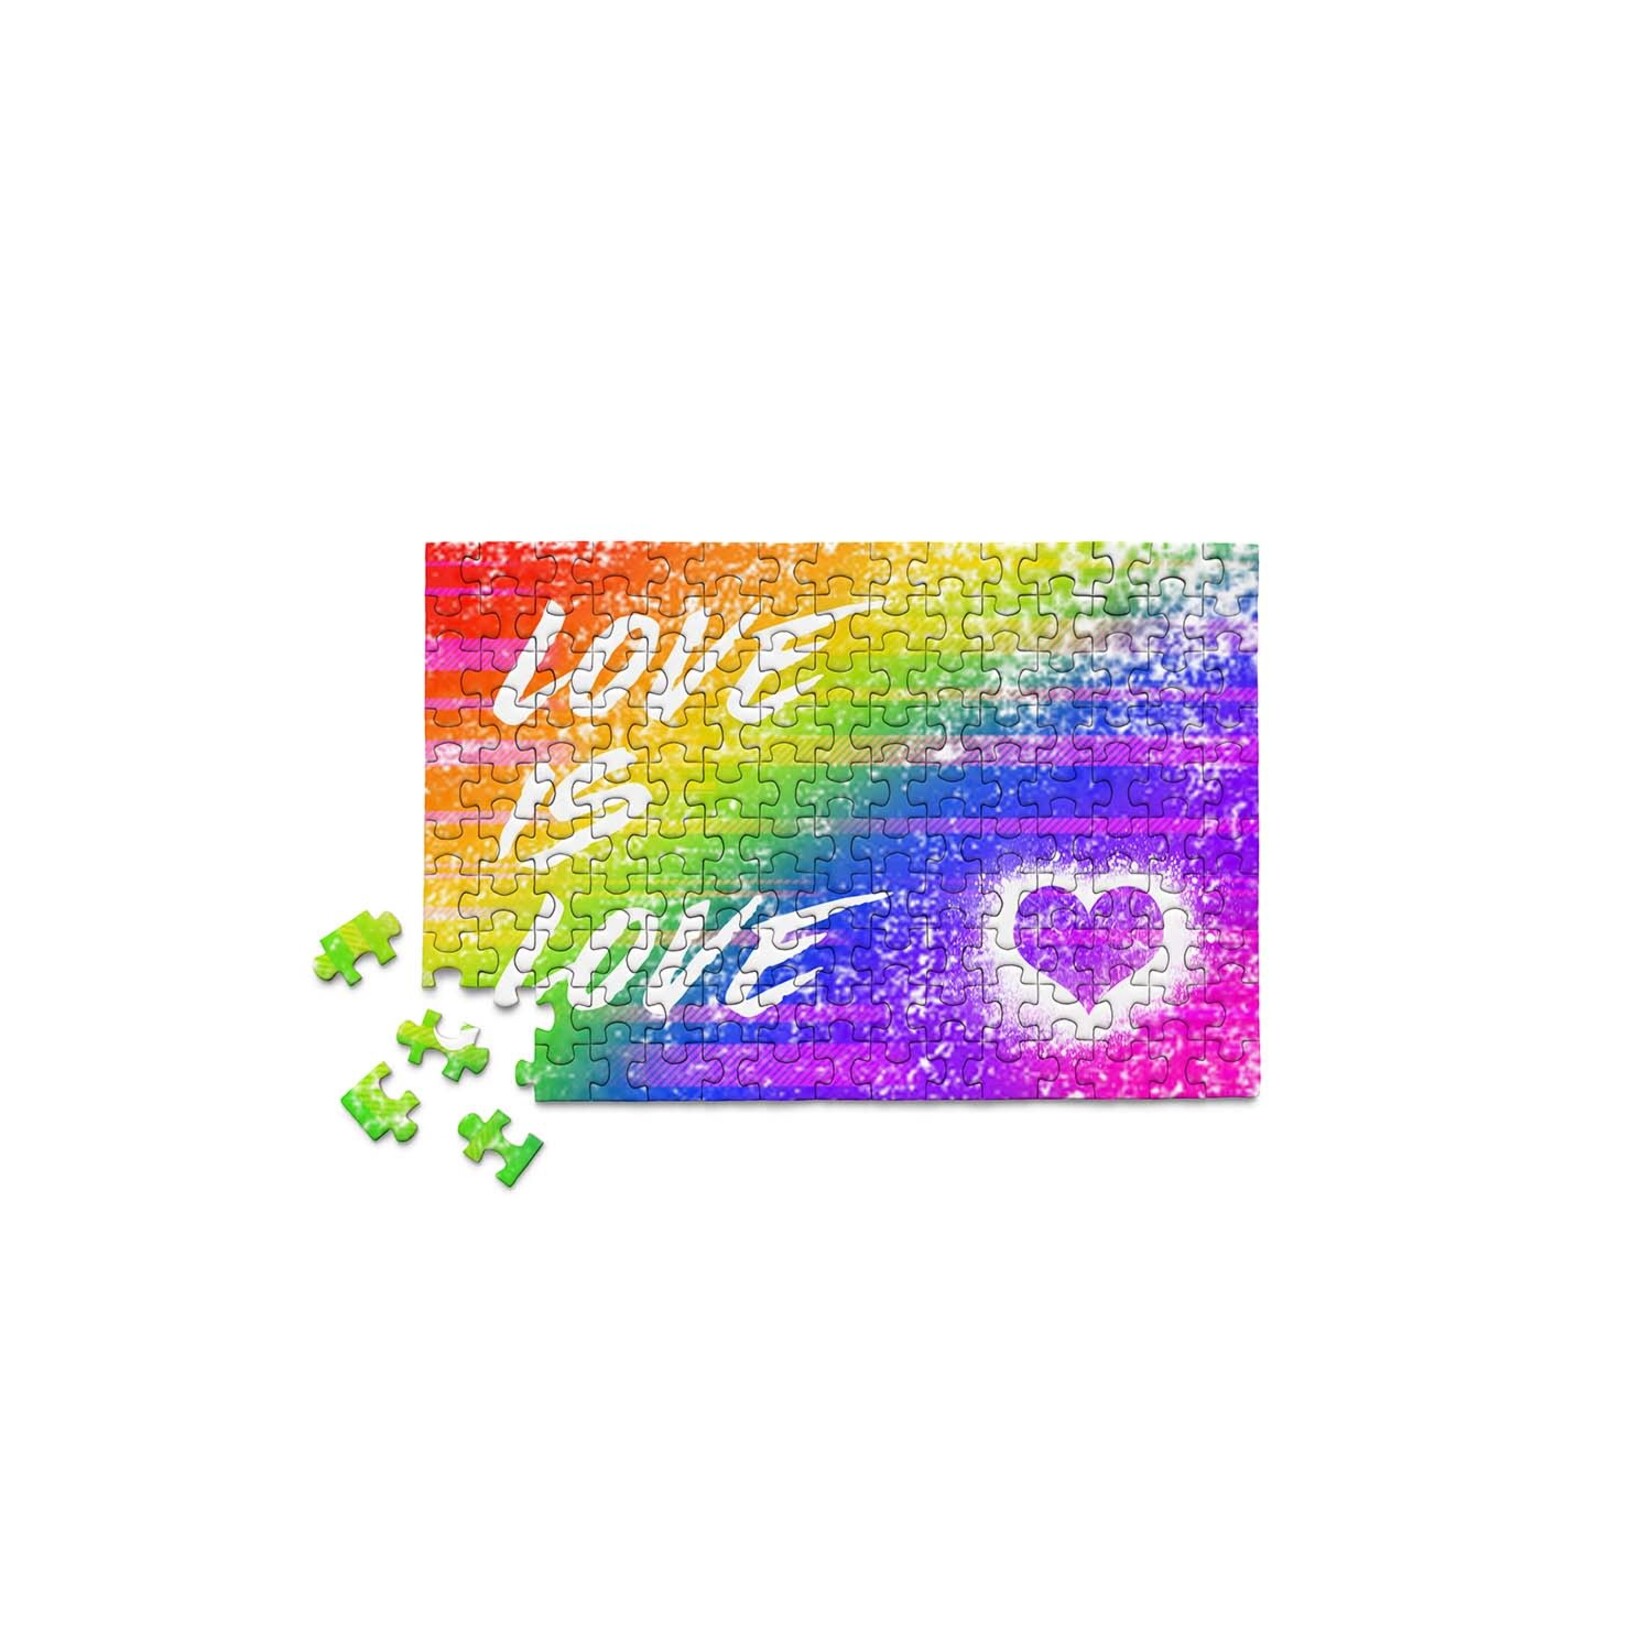 Micro Puzzles Love is Love, 150-Piece Mini Jigsaw Puzzle